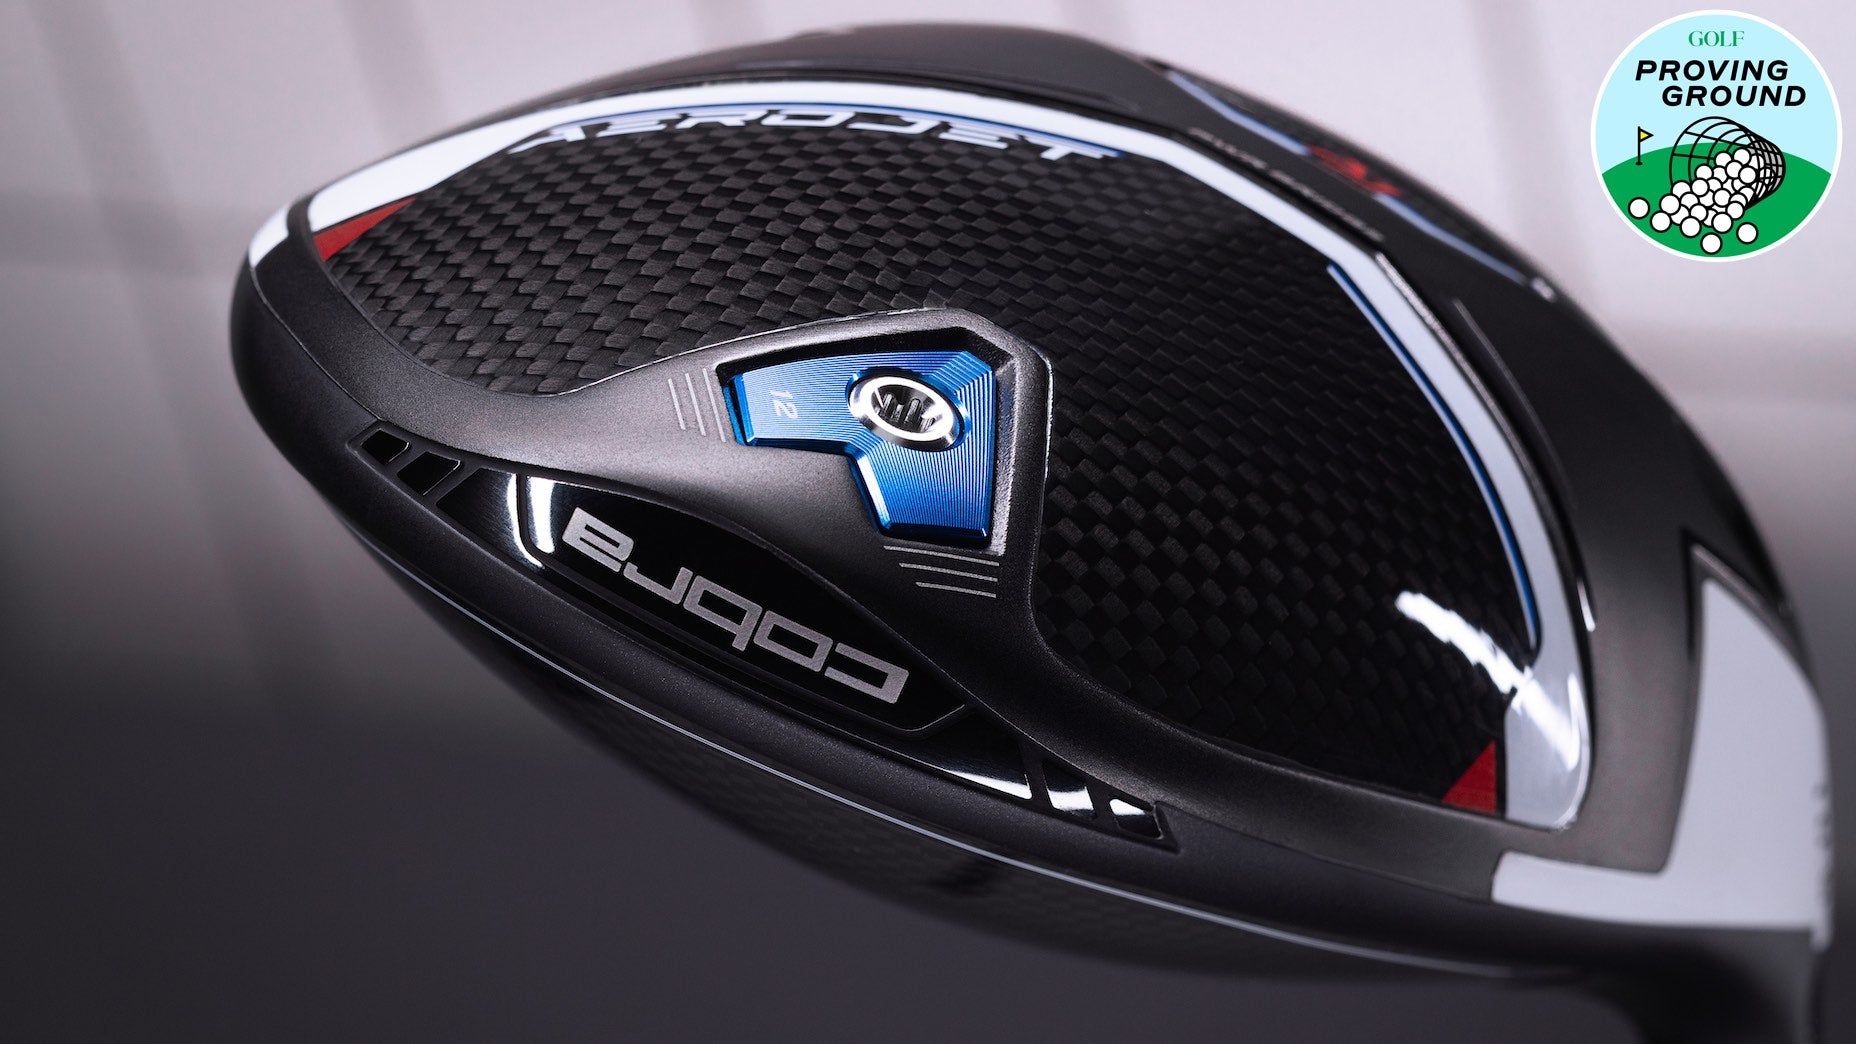 Cobra's Aerojet and King gear, through the eyes of a 6-handicap